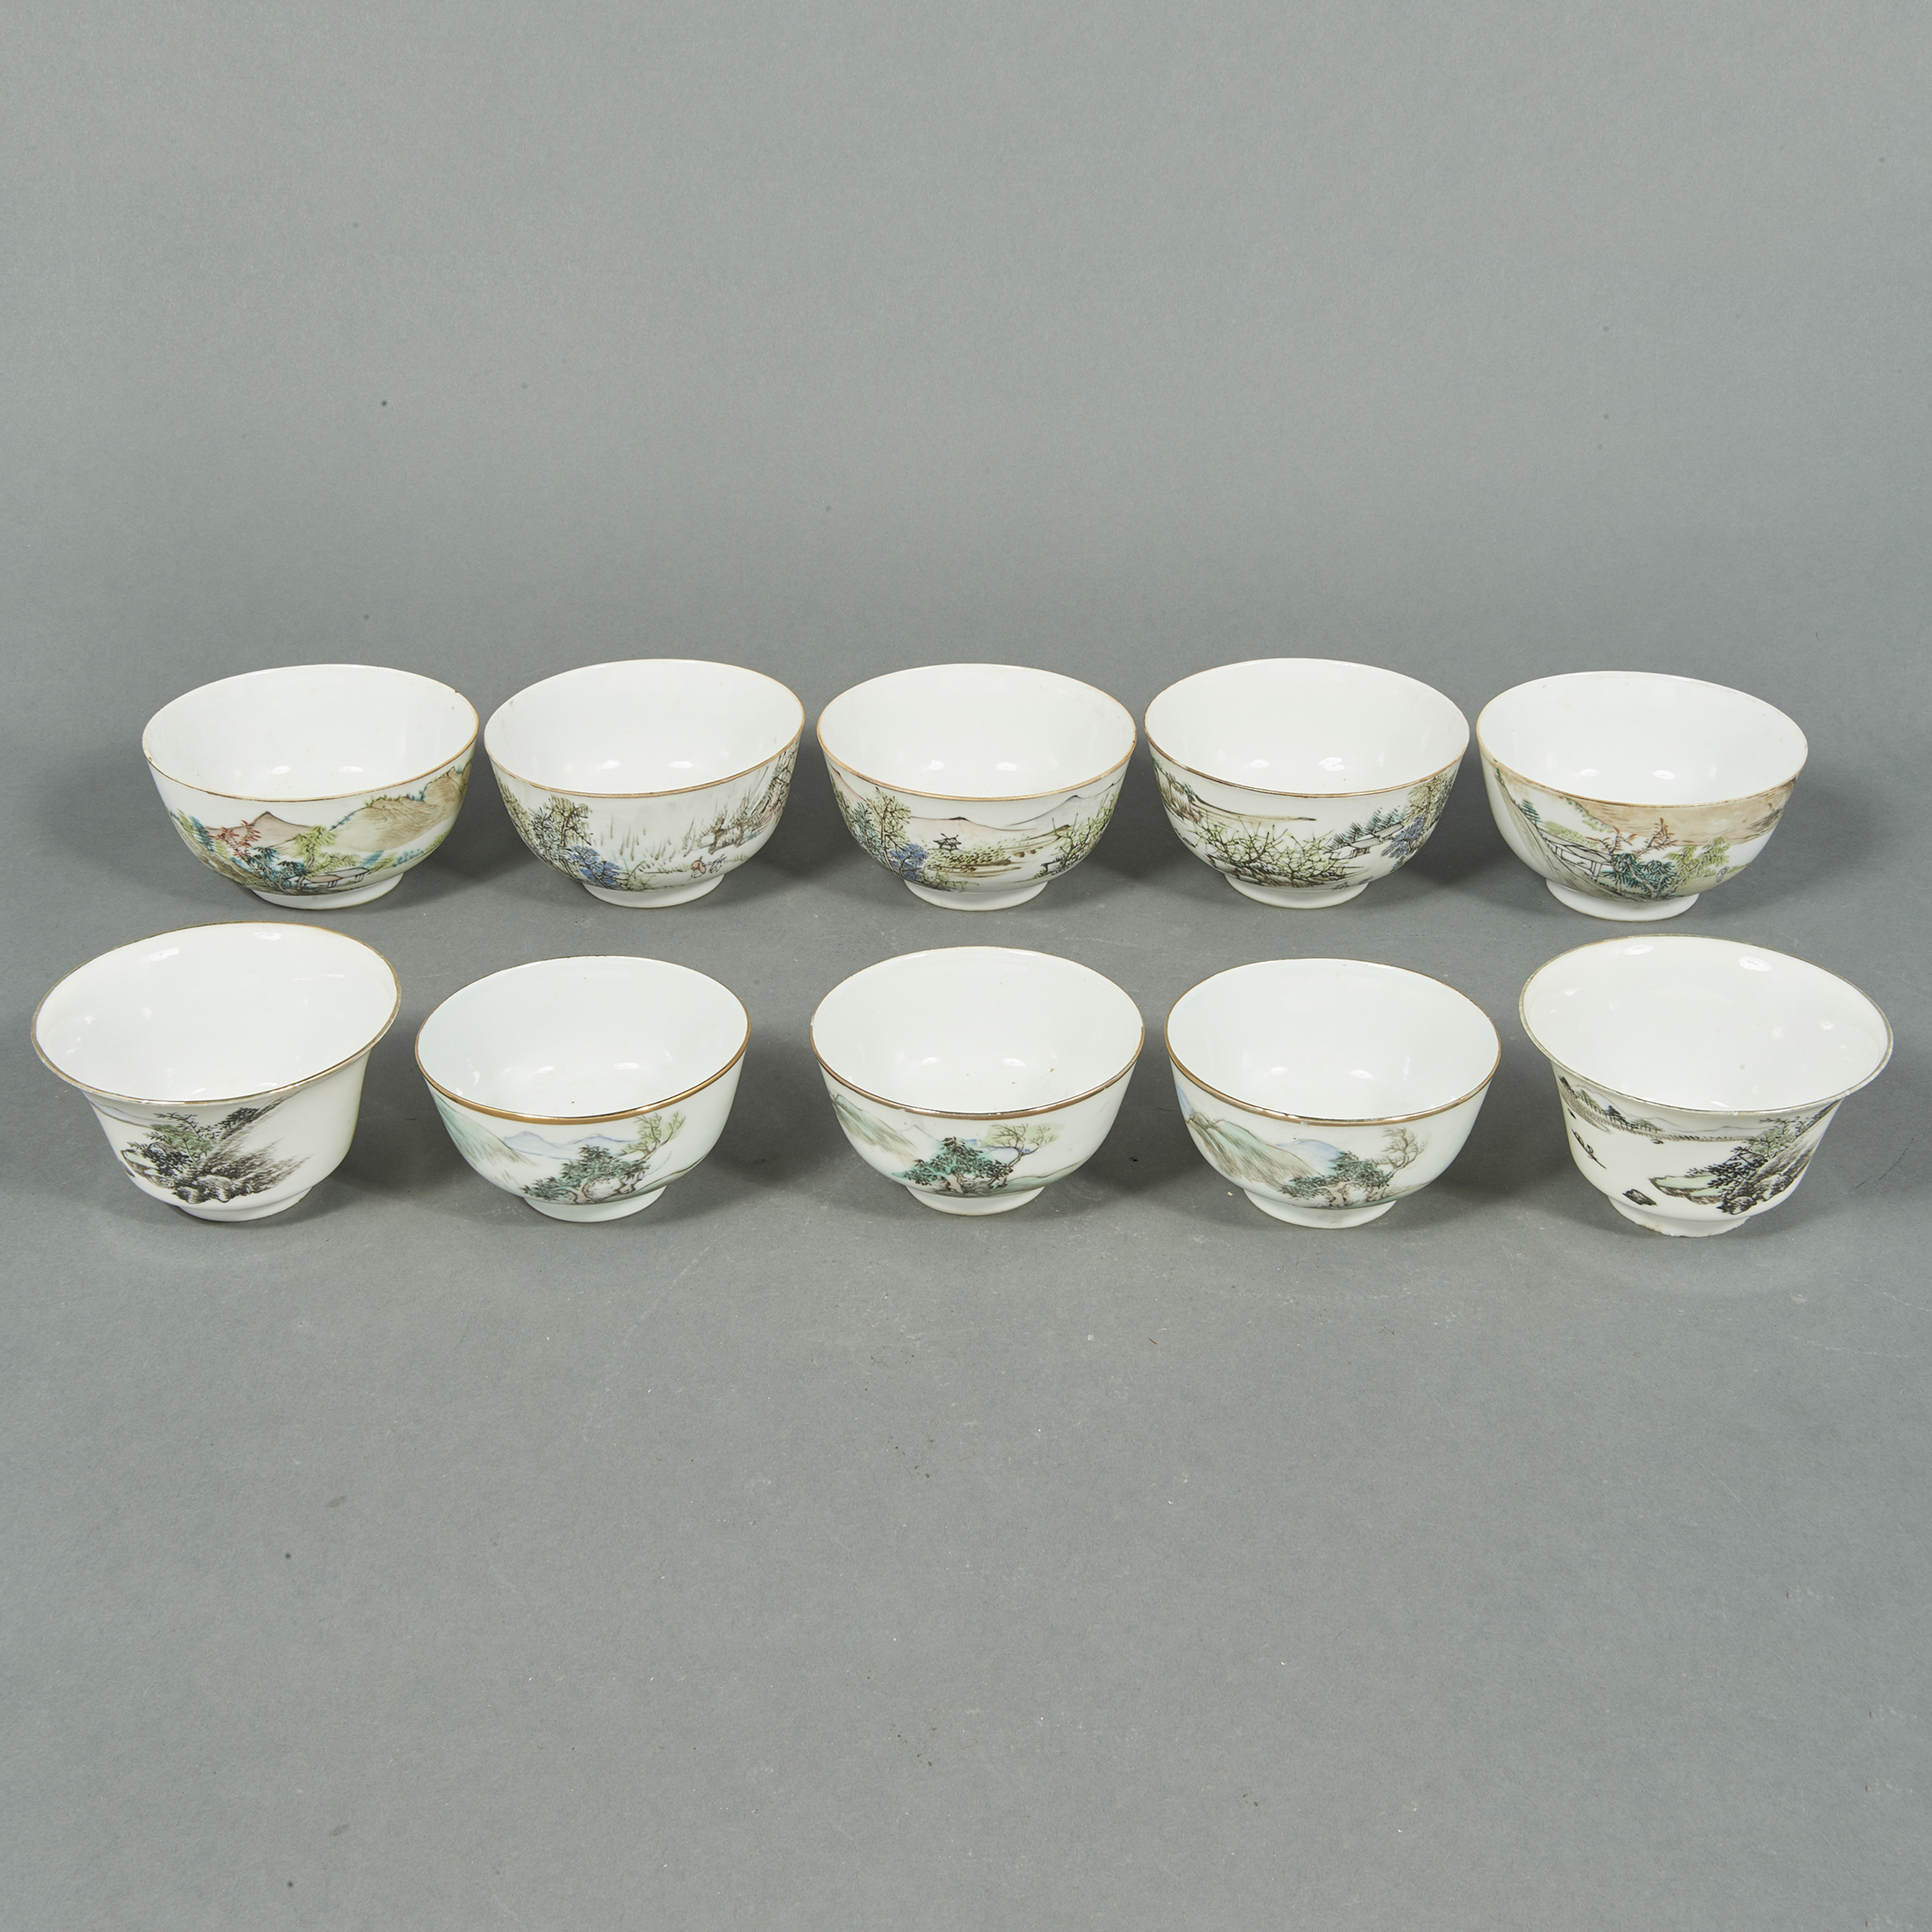  LOT OF 10 CHINESE POLYCHROME 3a6553